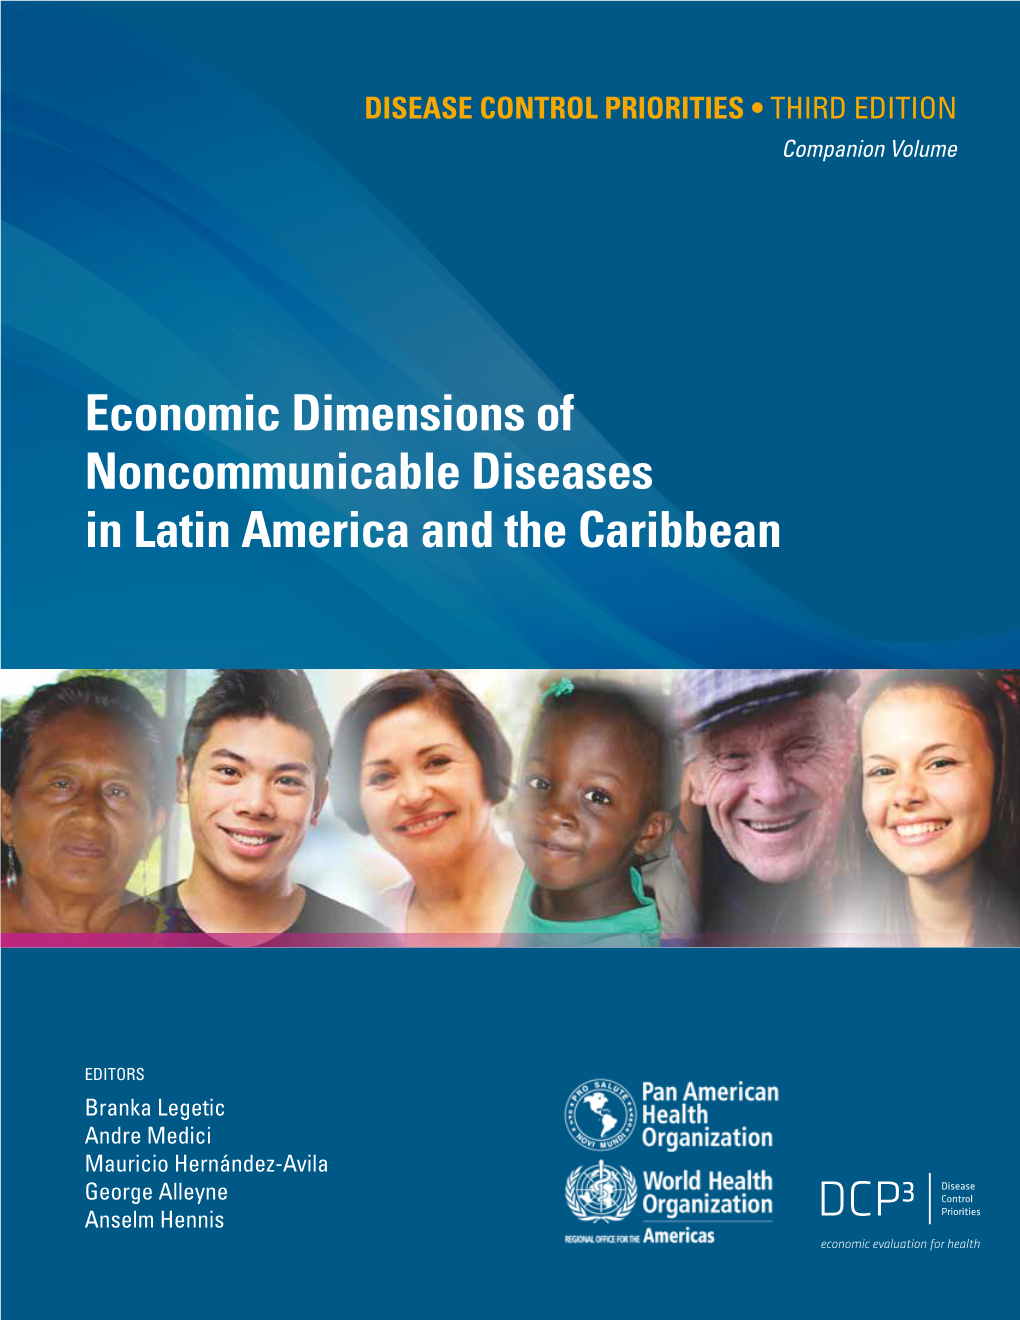 Economic Dimensions of Noncommunicable Diseases in Latin America and the Caribbean